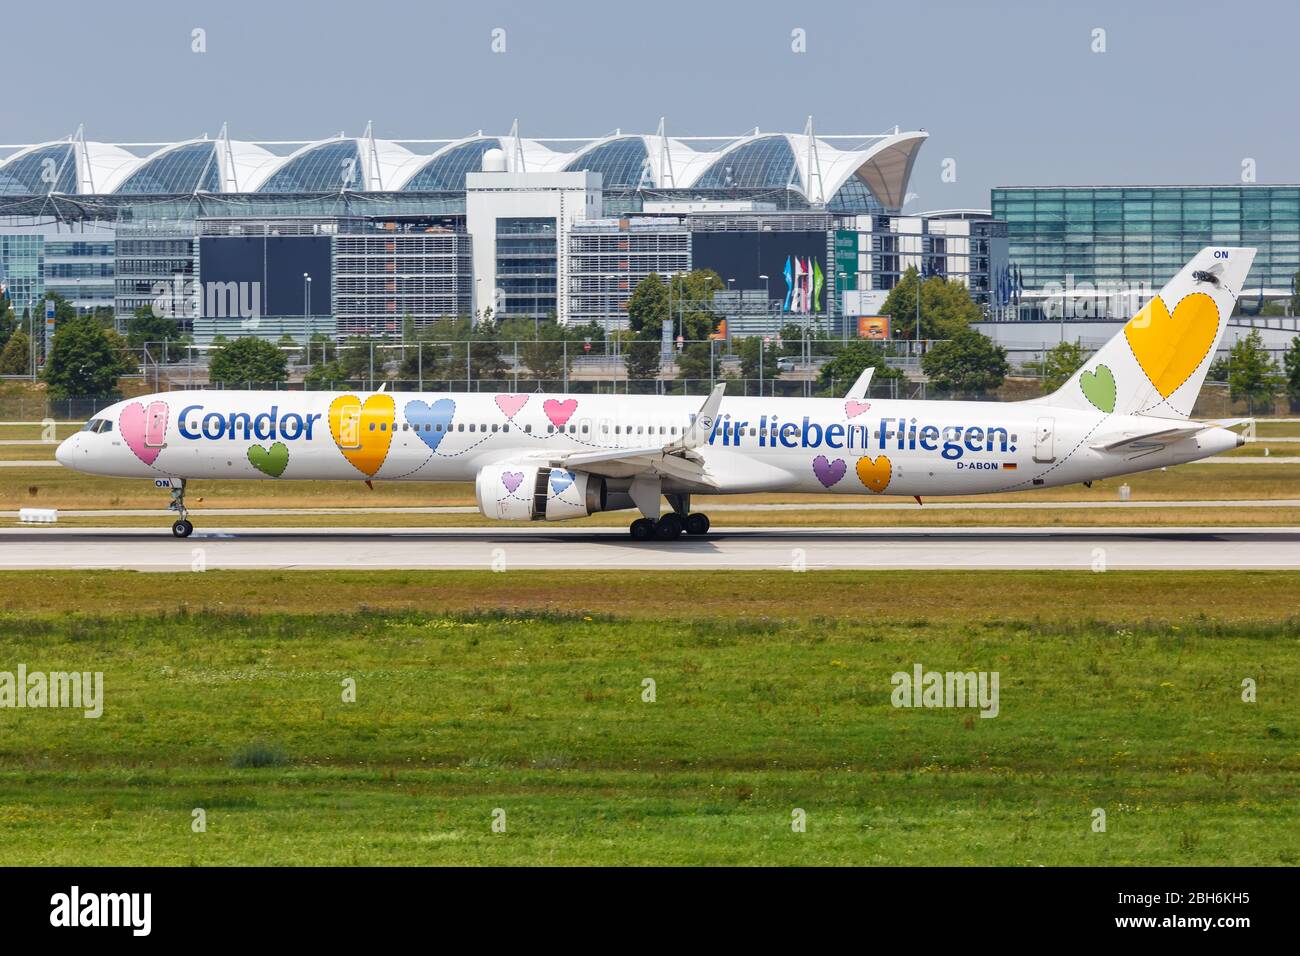 Munich, Germany – July 20, 2019: Condor Boeing 757-300 airplane at Munich airport (MUC) in Germany. Boeing is an American aircraft manufacturer headqu Stock Photo